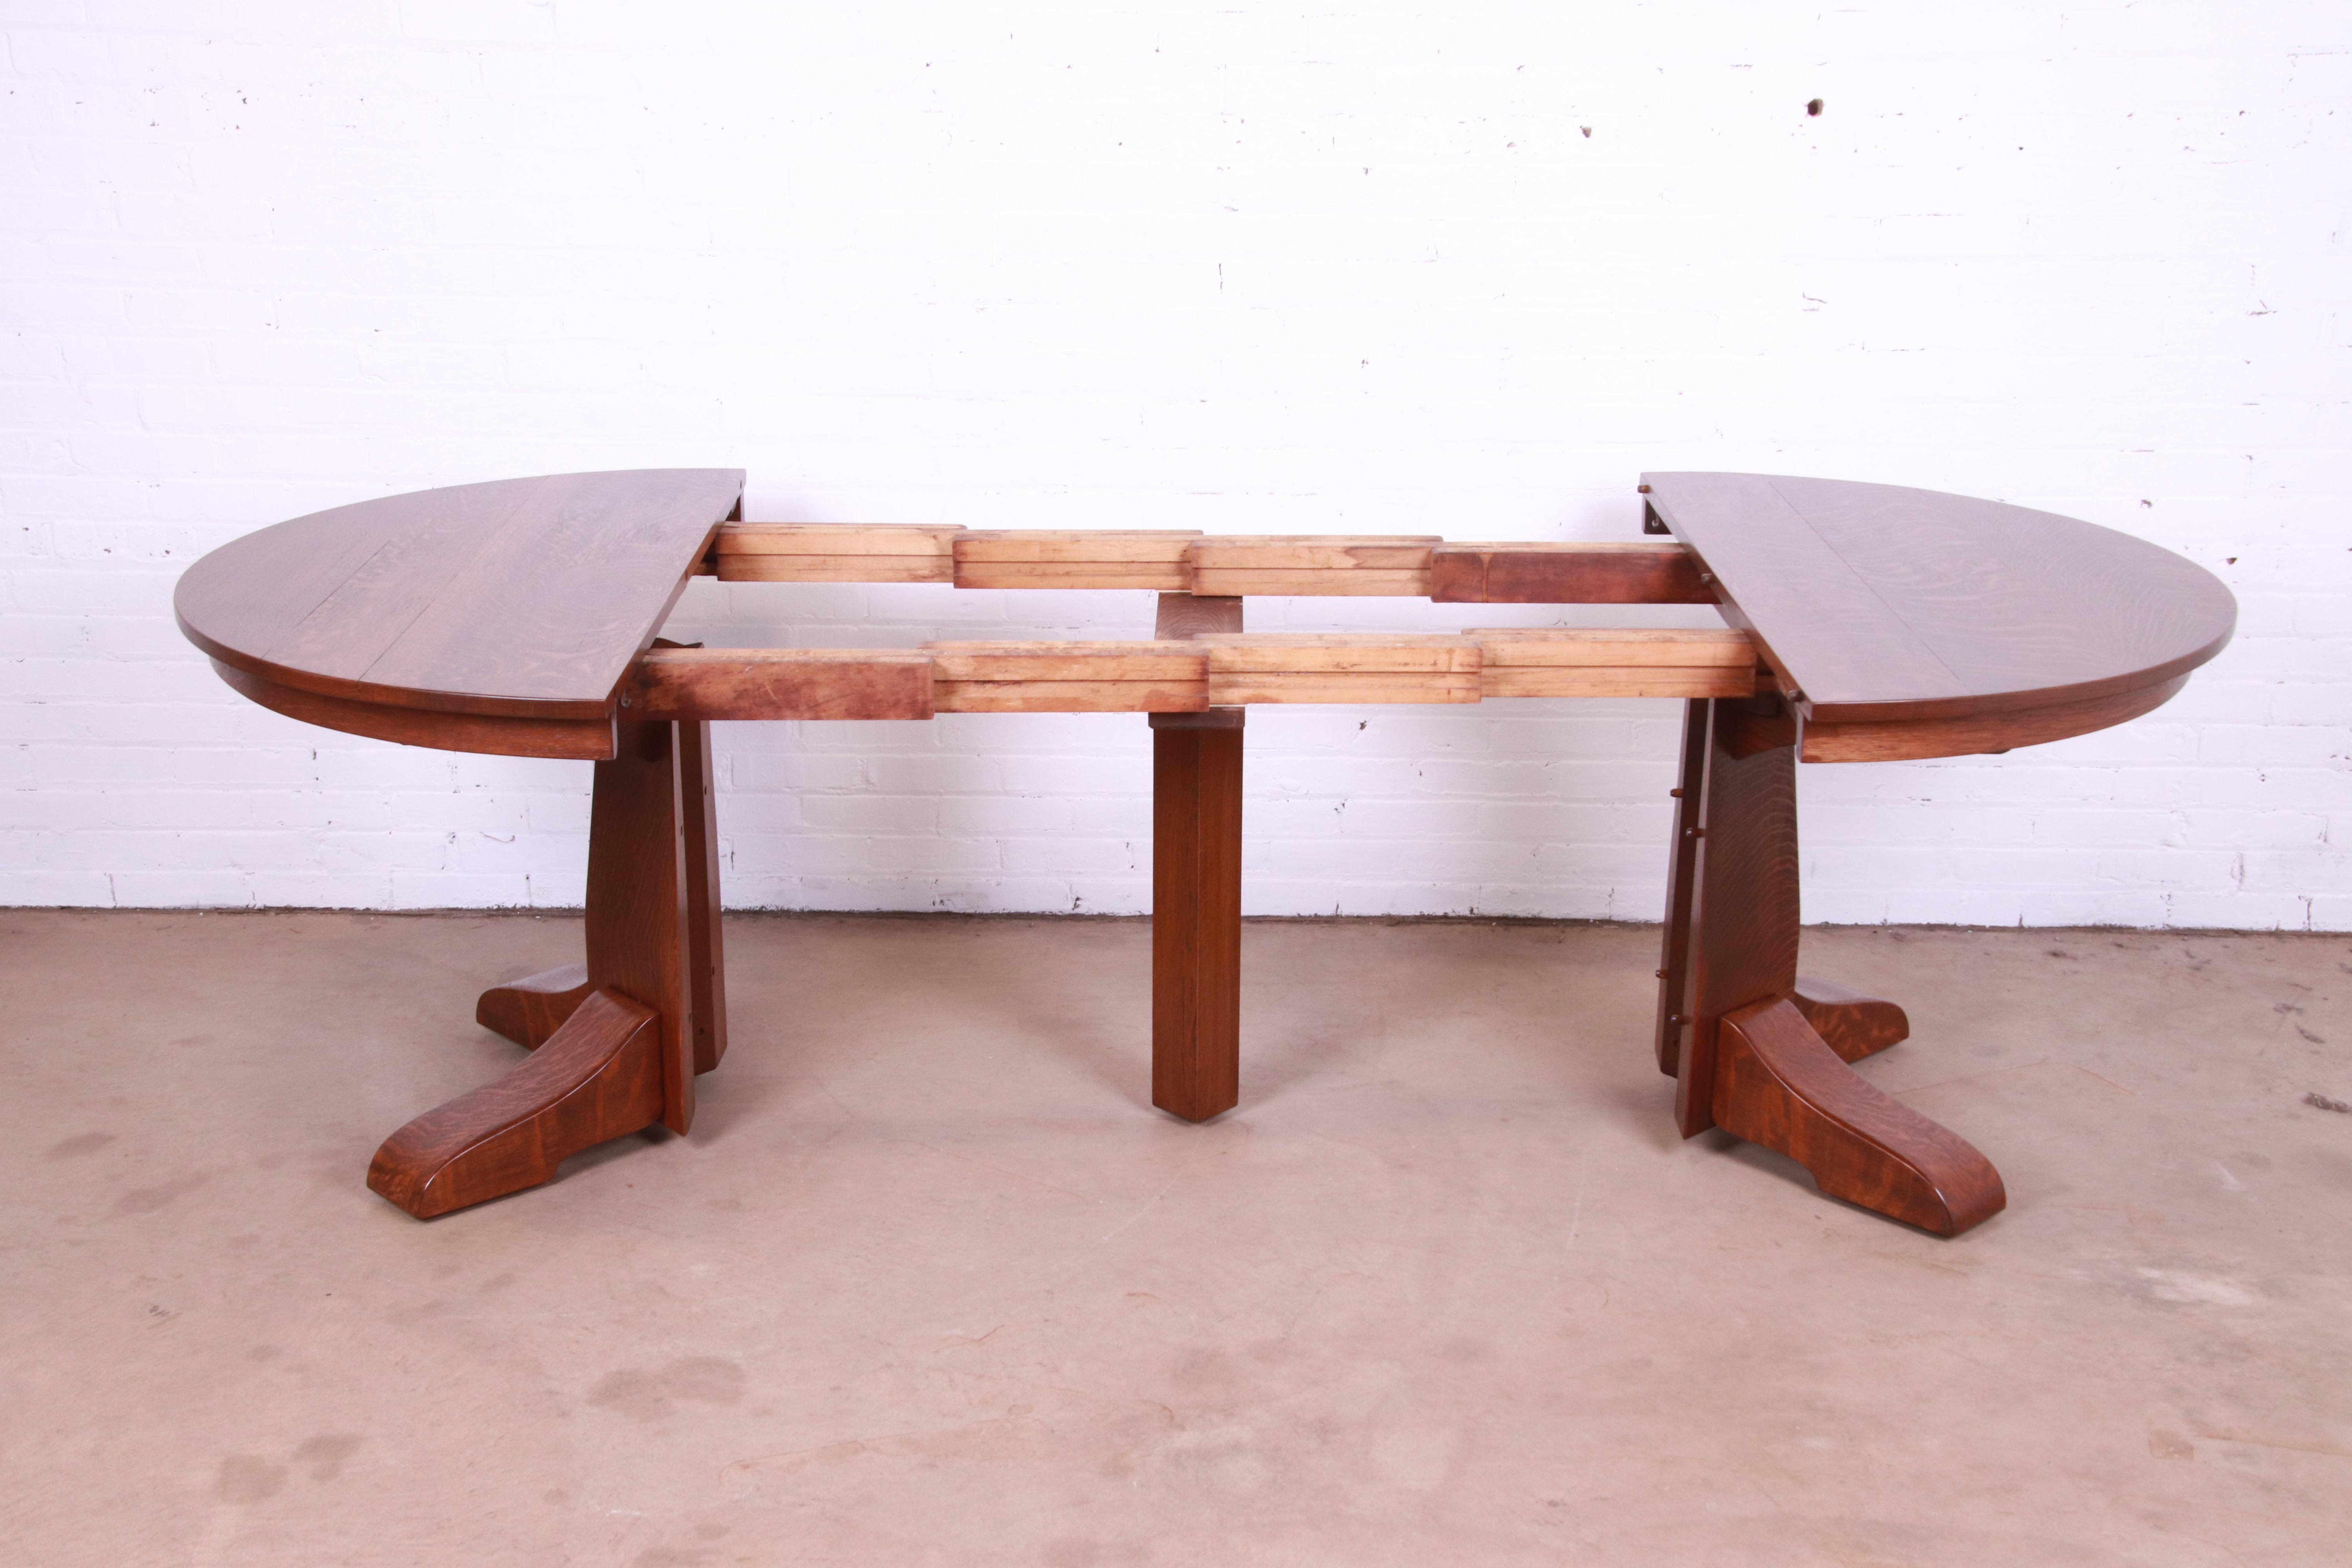 20th Century Gustav Stickley Mission Oak Arts & Crafts Extension Dining Table, Newly Restored For Sale